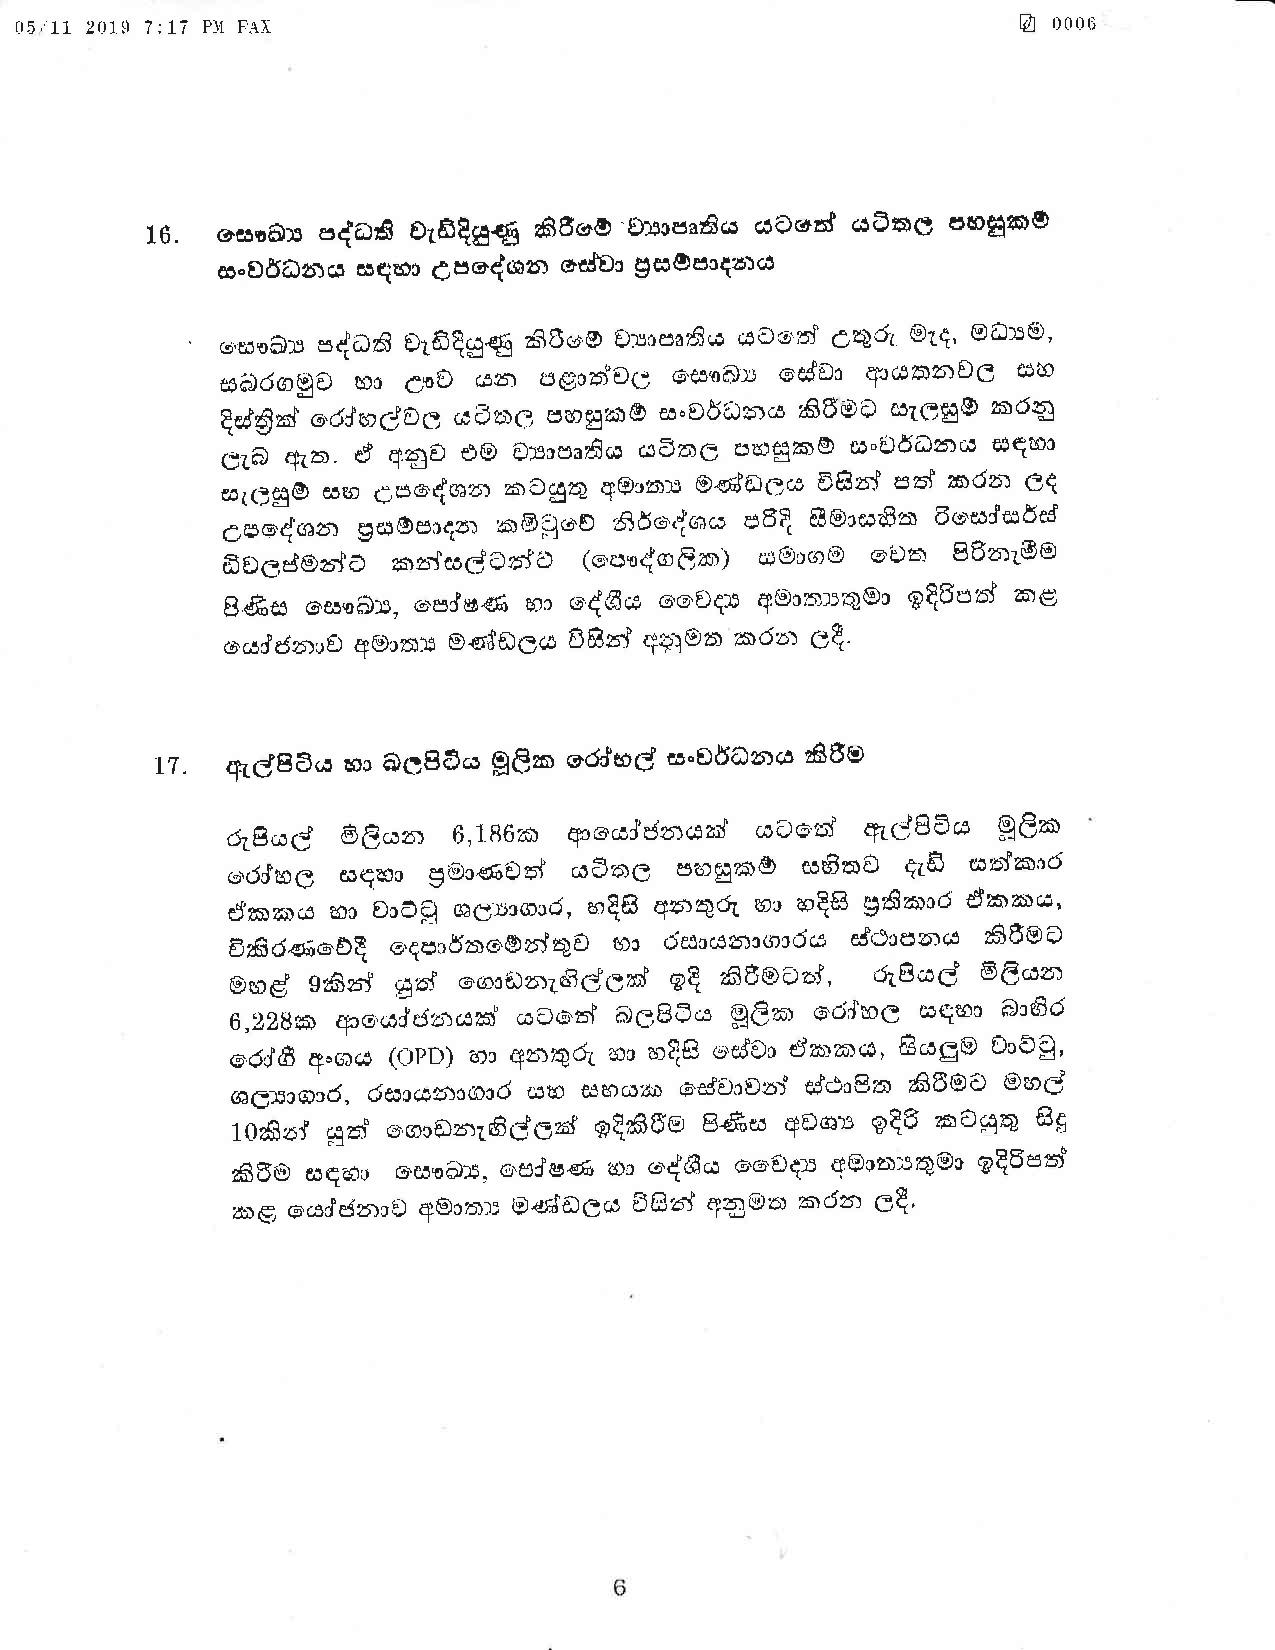 Cabinet Decision on 05.11.2019 page 006